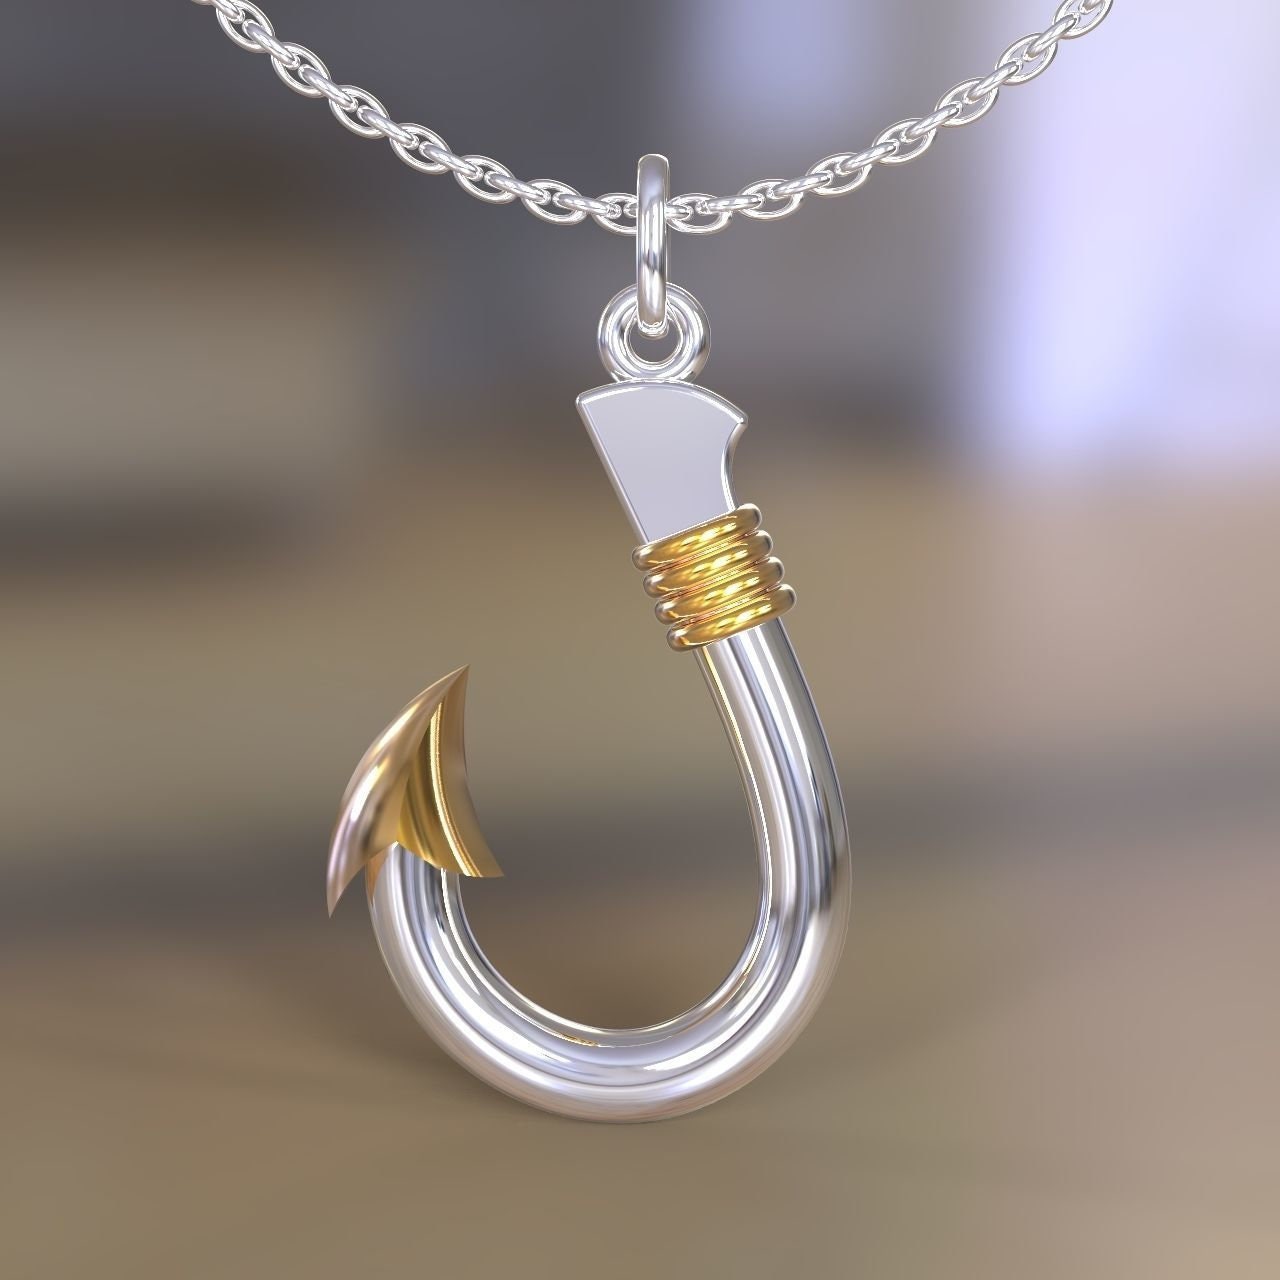 Perfect Cast Fishing Hook Pendant *10k/14k/18k White, Yellow, Rose, Green  Gold and Silver* Fish Rod Fisherman Boat Ship Water Charm Necklace